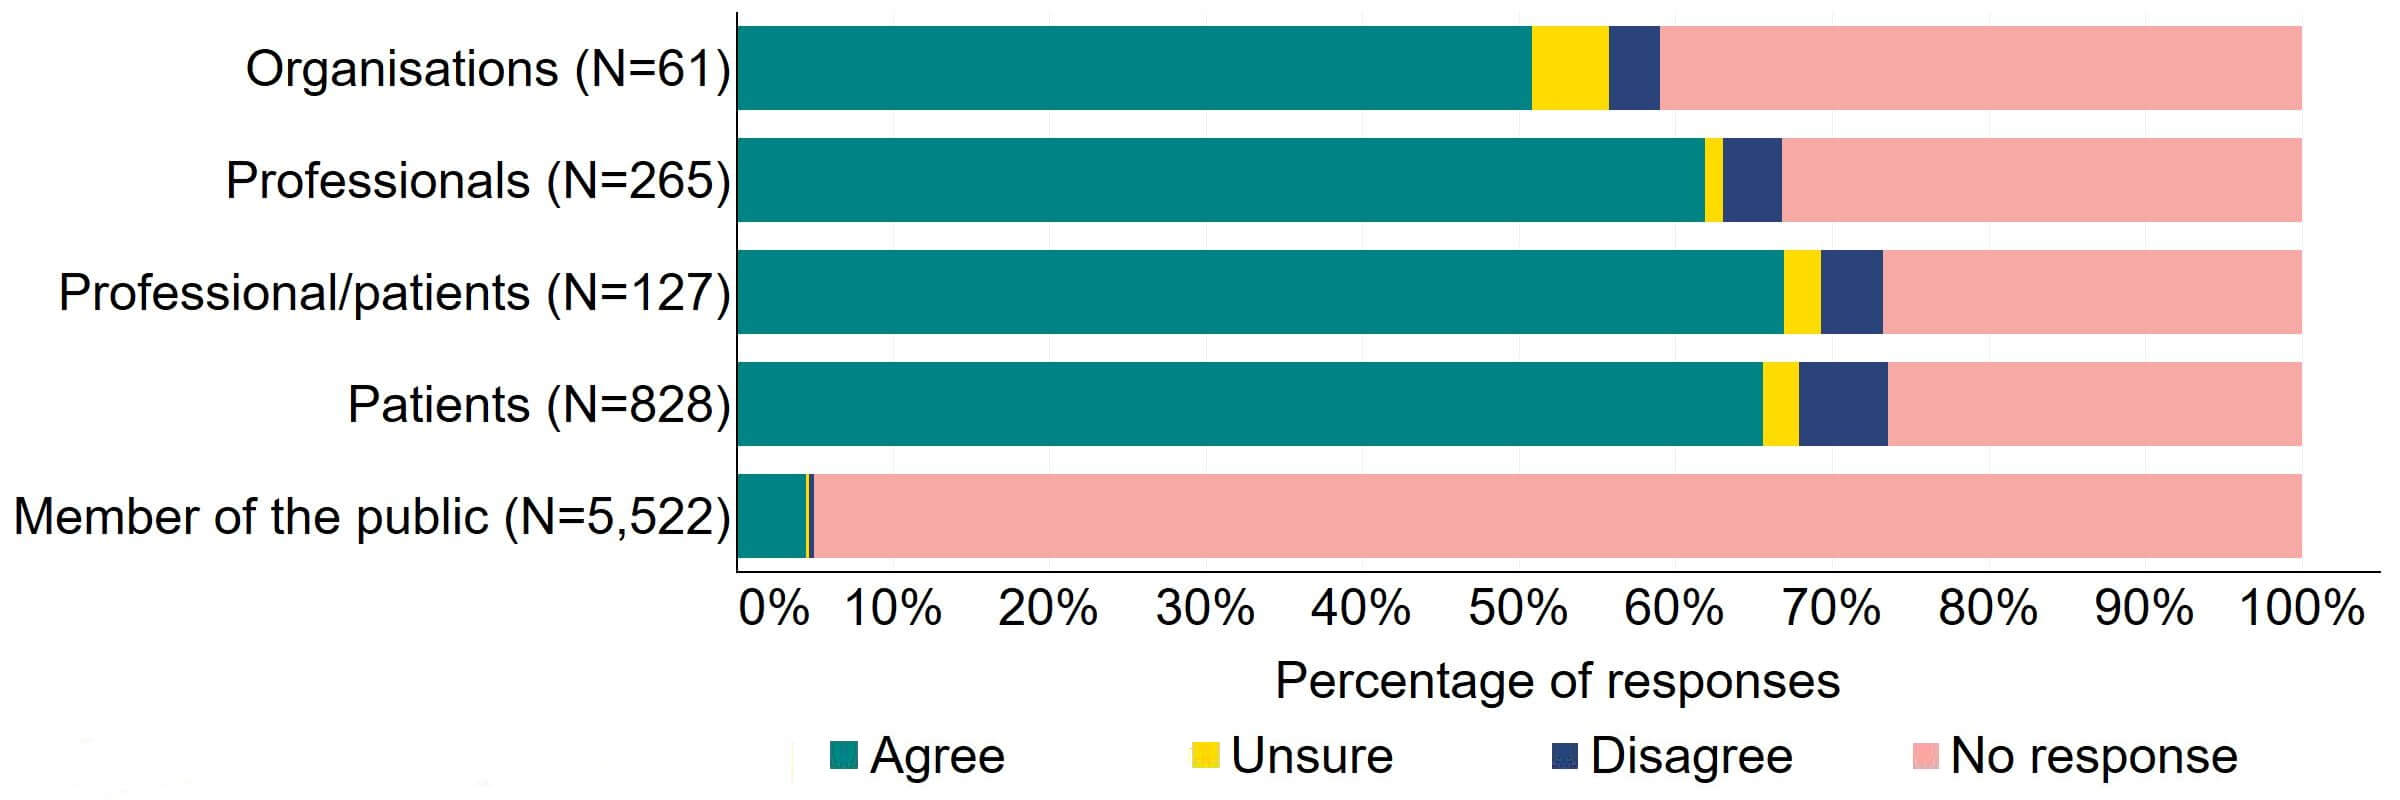 Figure 13 is a stacked bar chart showing the proportion of respondents in each response group who agreed, disagreed, were unsure, or who did not provide a response to the proposal. The underlying data can be downloaded as an Excel worksheet at the top of the page.